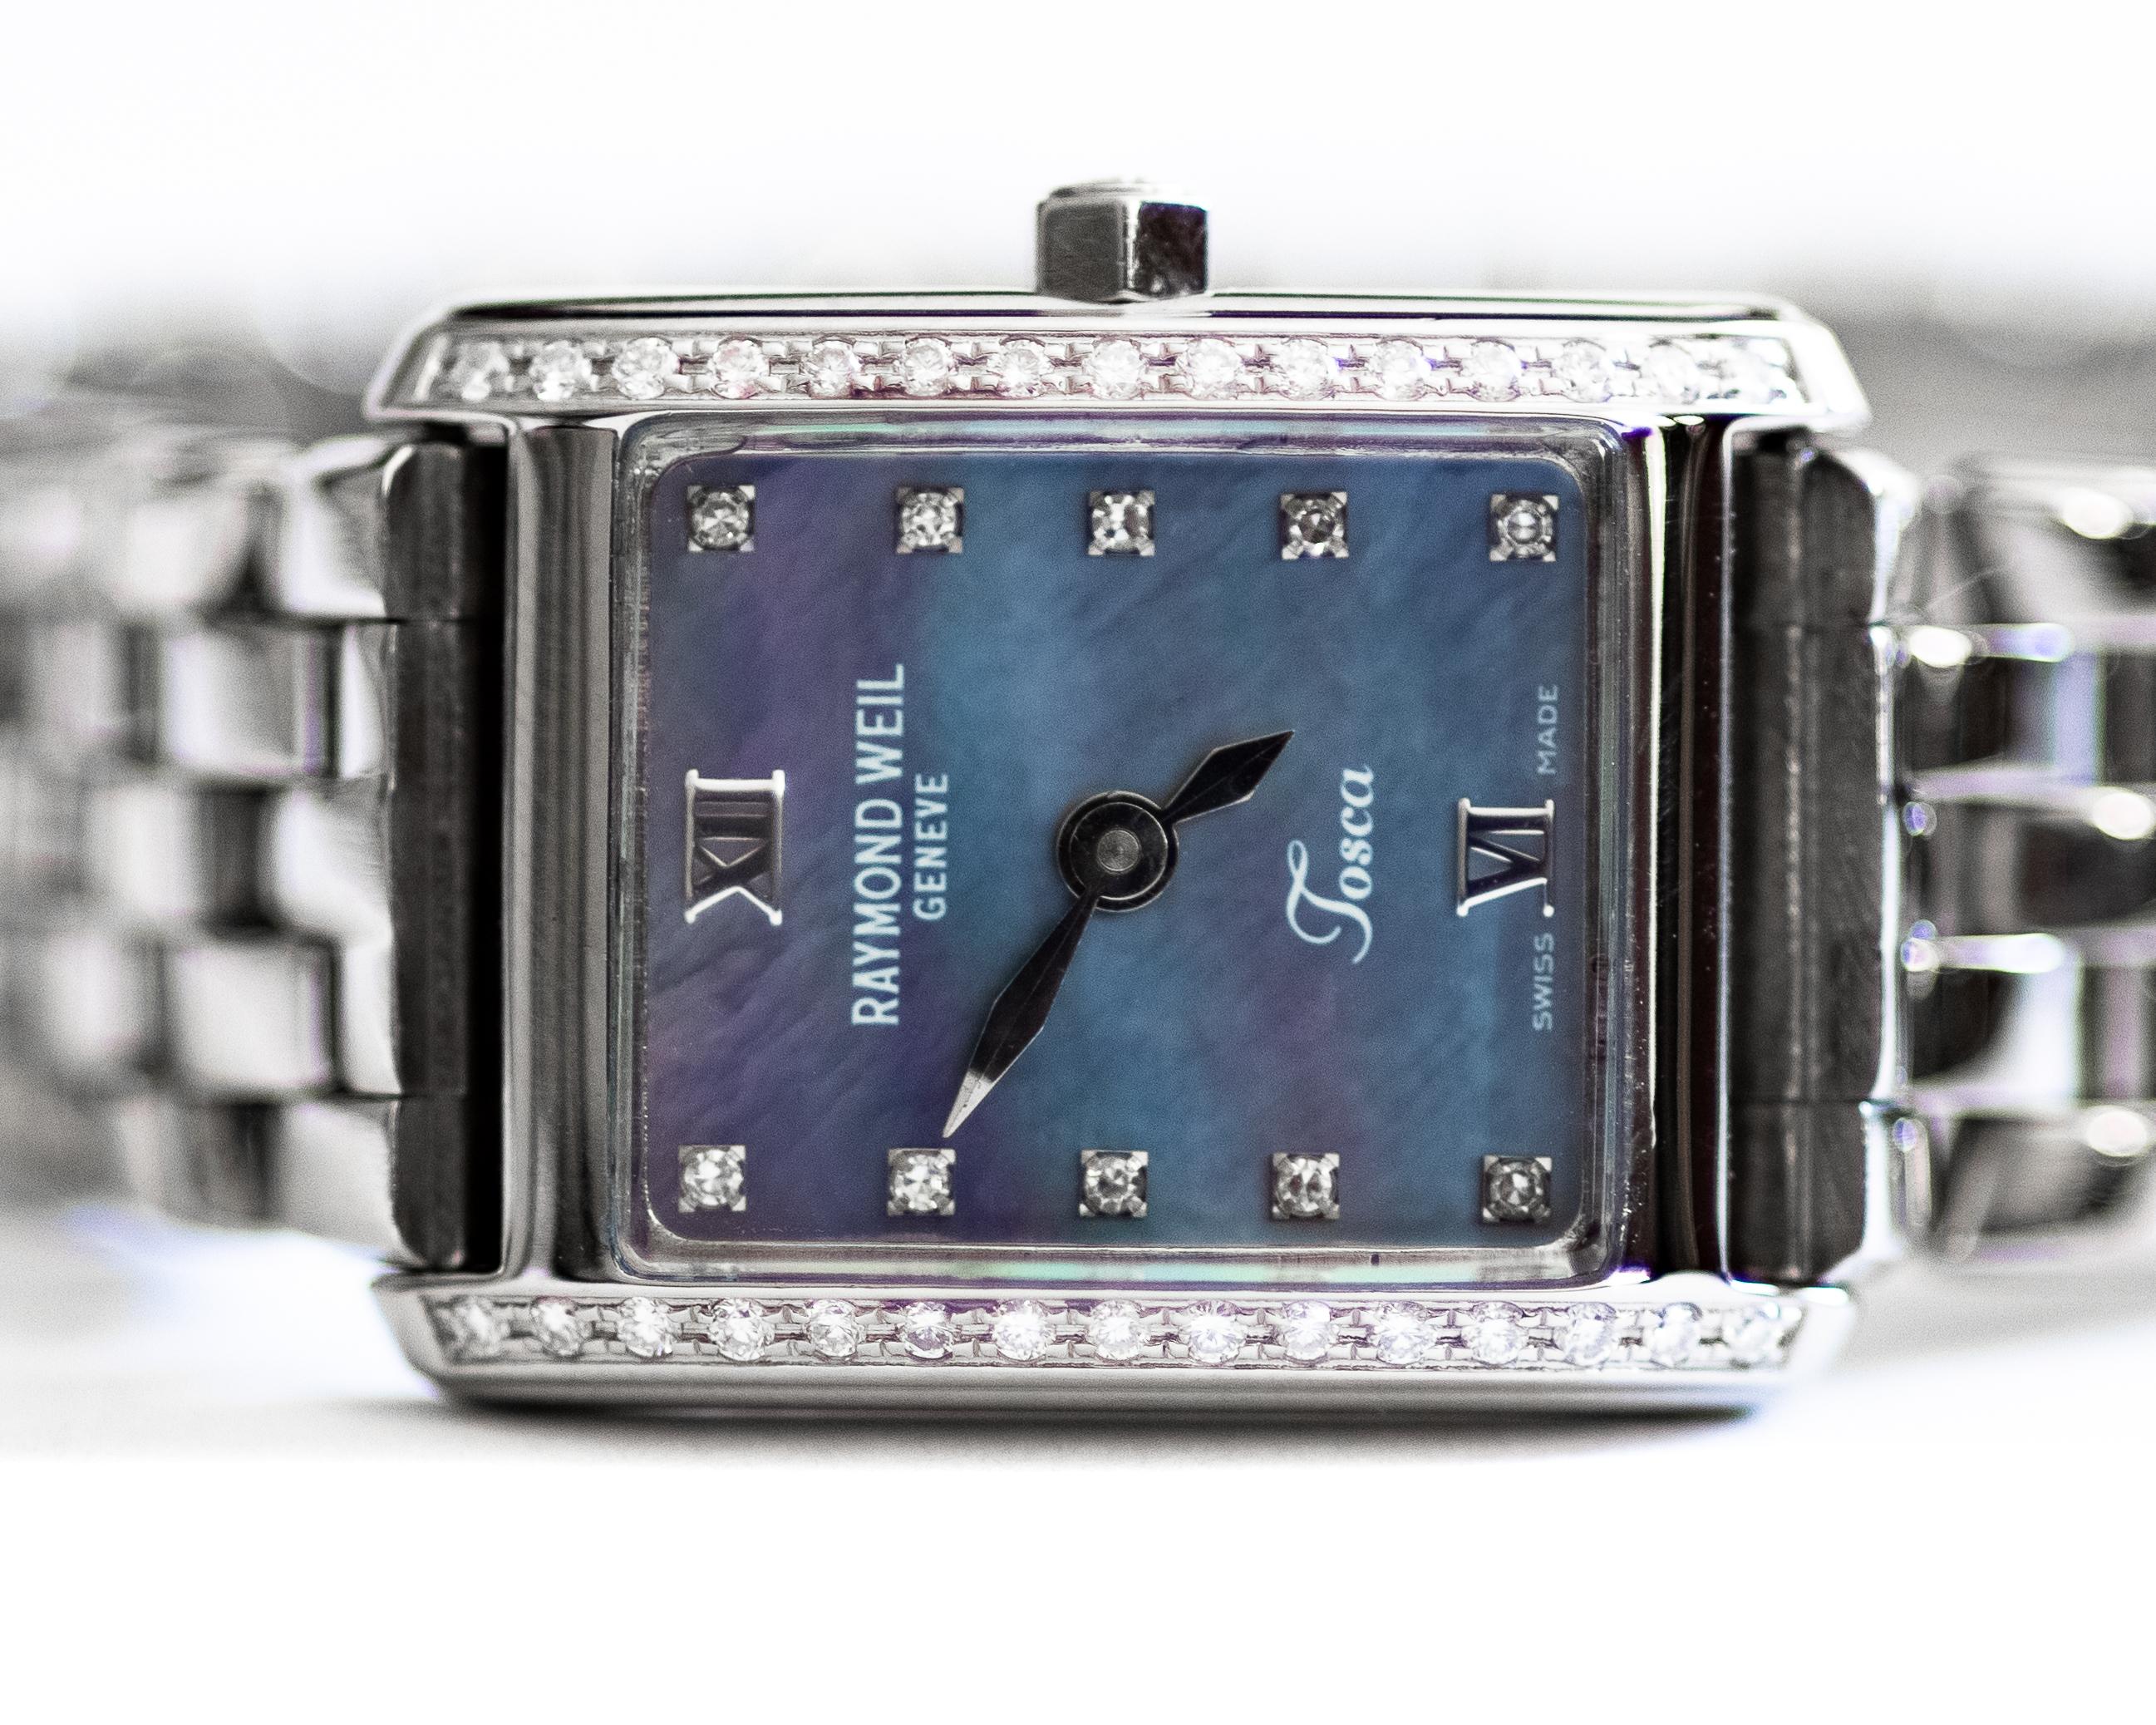 Item Description:
Metal type: Stainless Steel
Weight: 42 grams
Fits a 7 inch wrist 
From the 1990s

This is a stunning women's wristwatch from the iconic brand, Raymond Weil Tosca. 
The watch features a mother of pearl dial with diamond accents and